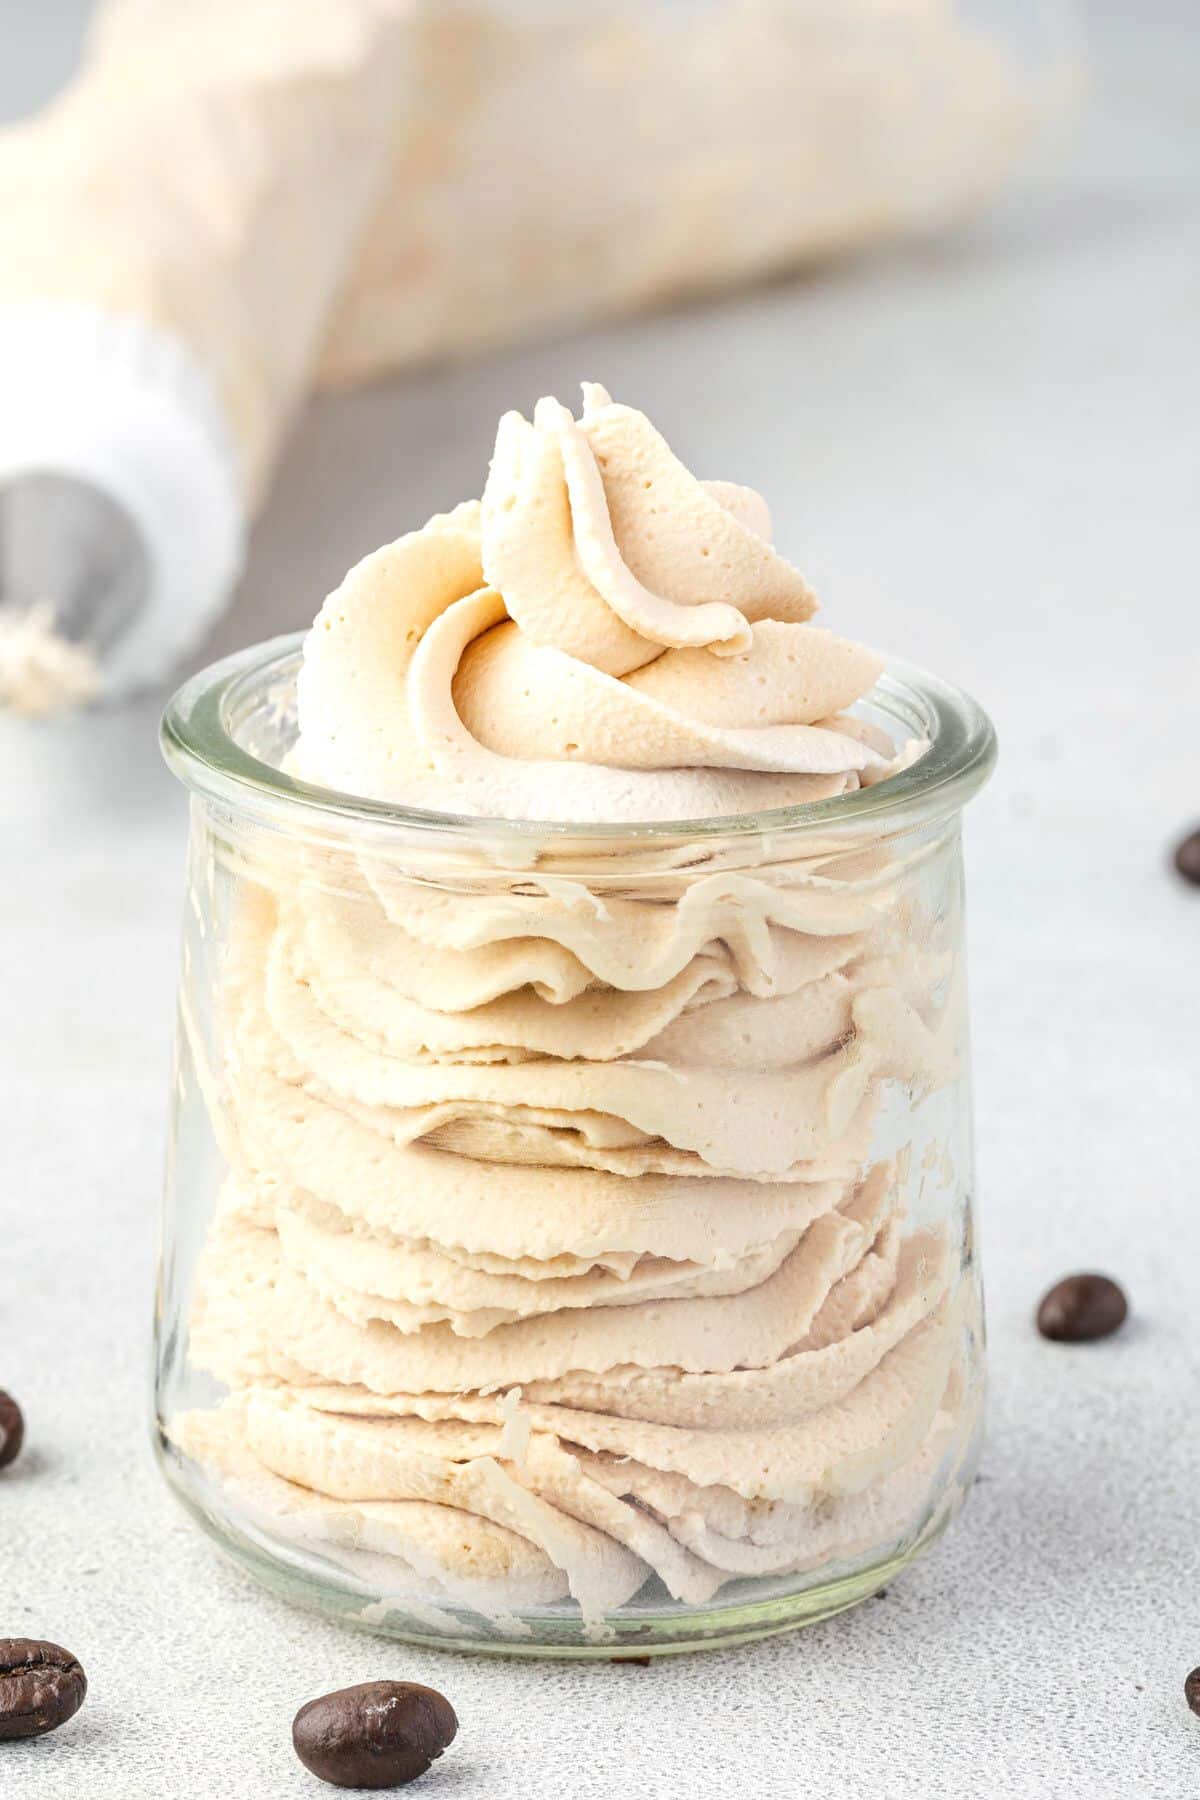 Coffee chantilly cream piped into a glass jar with a piping bag in the background.